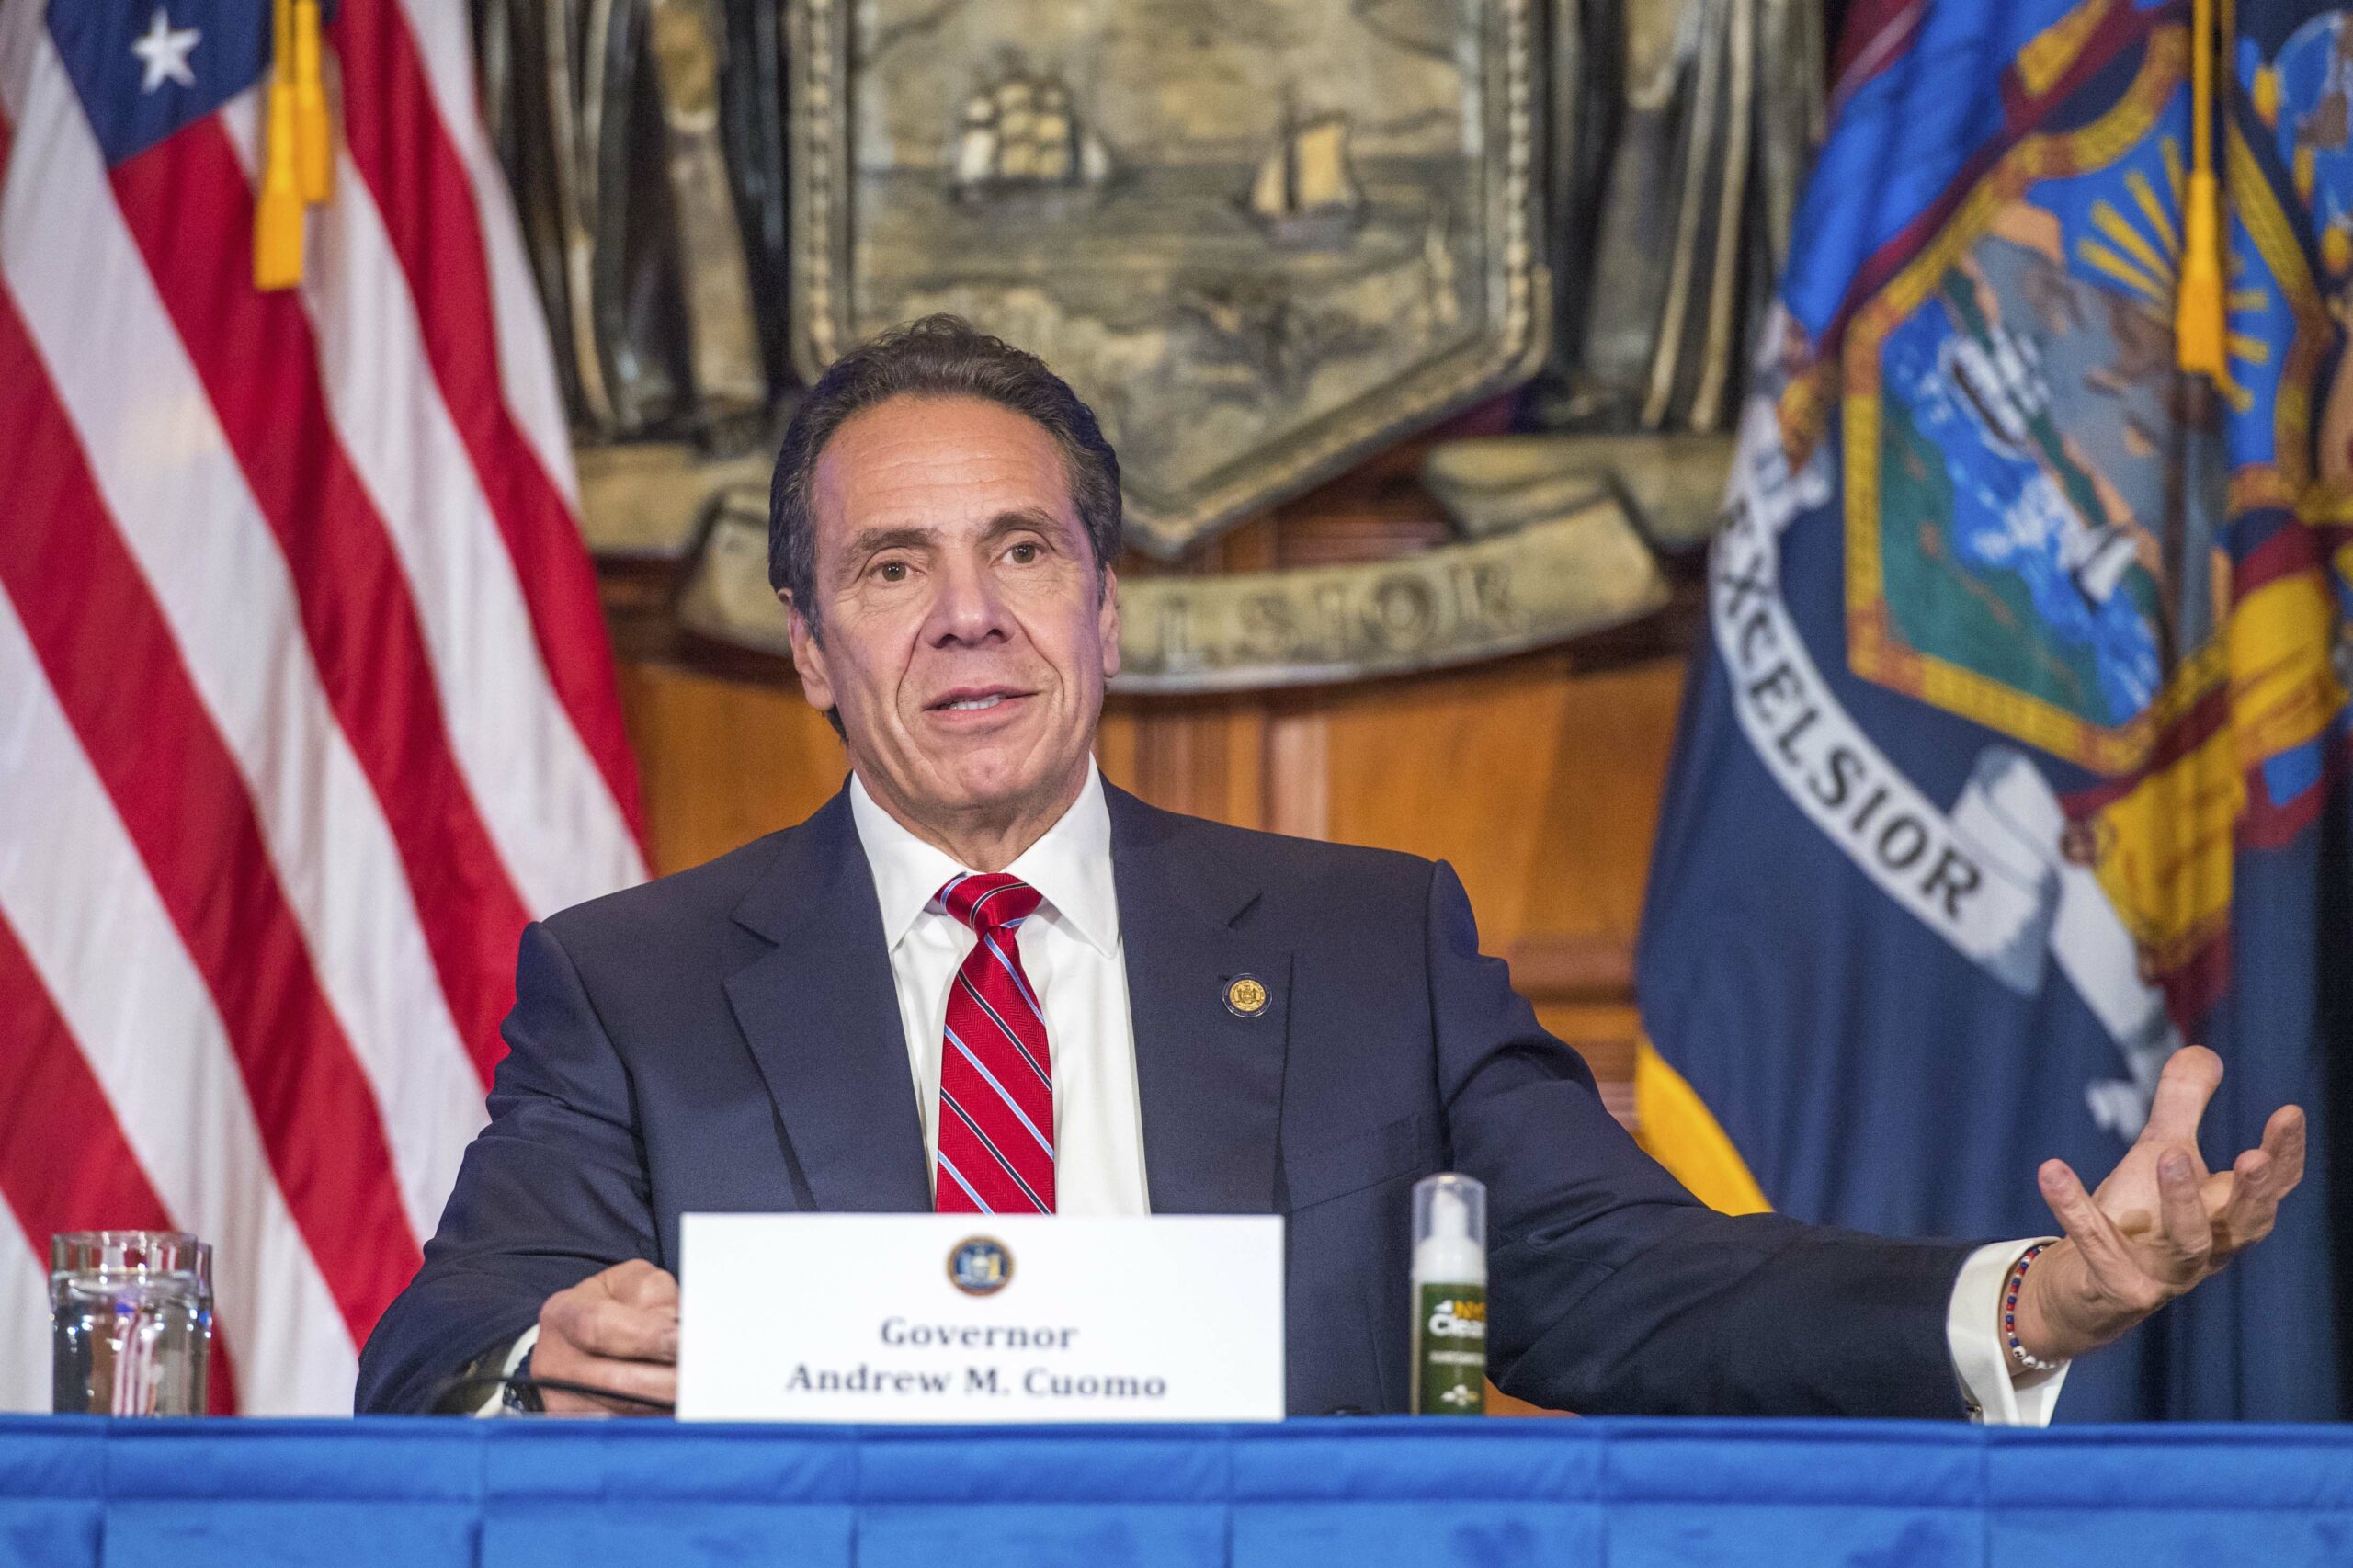 ‘Ridiculous demands’ and ‘impossible requests’: Life outside Cuomo’s pandemic war room